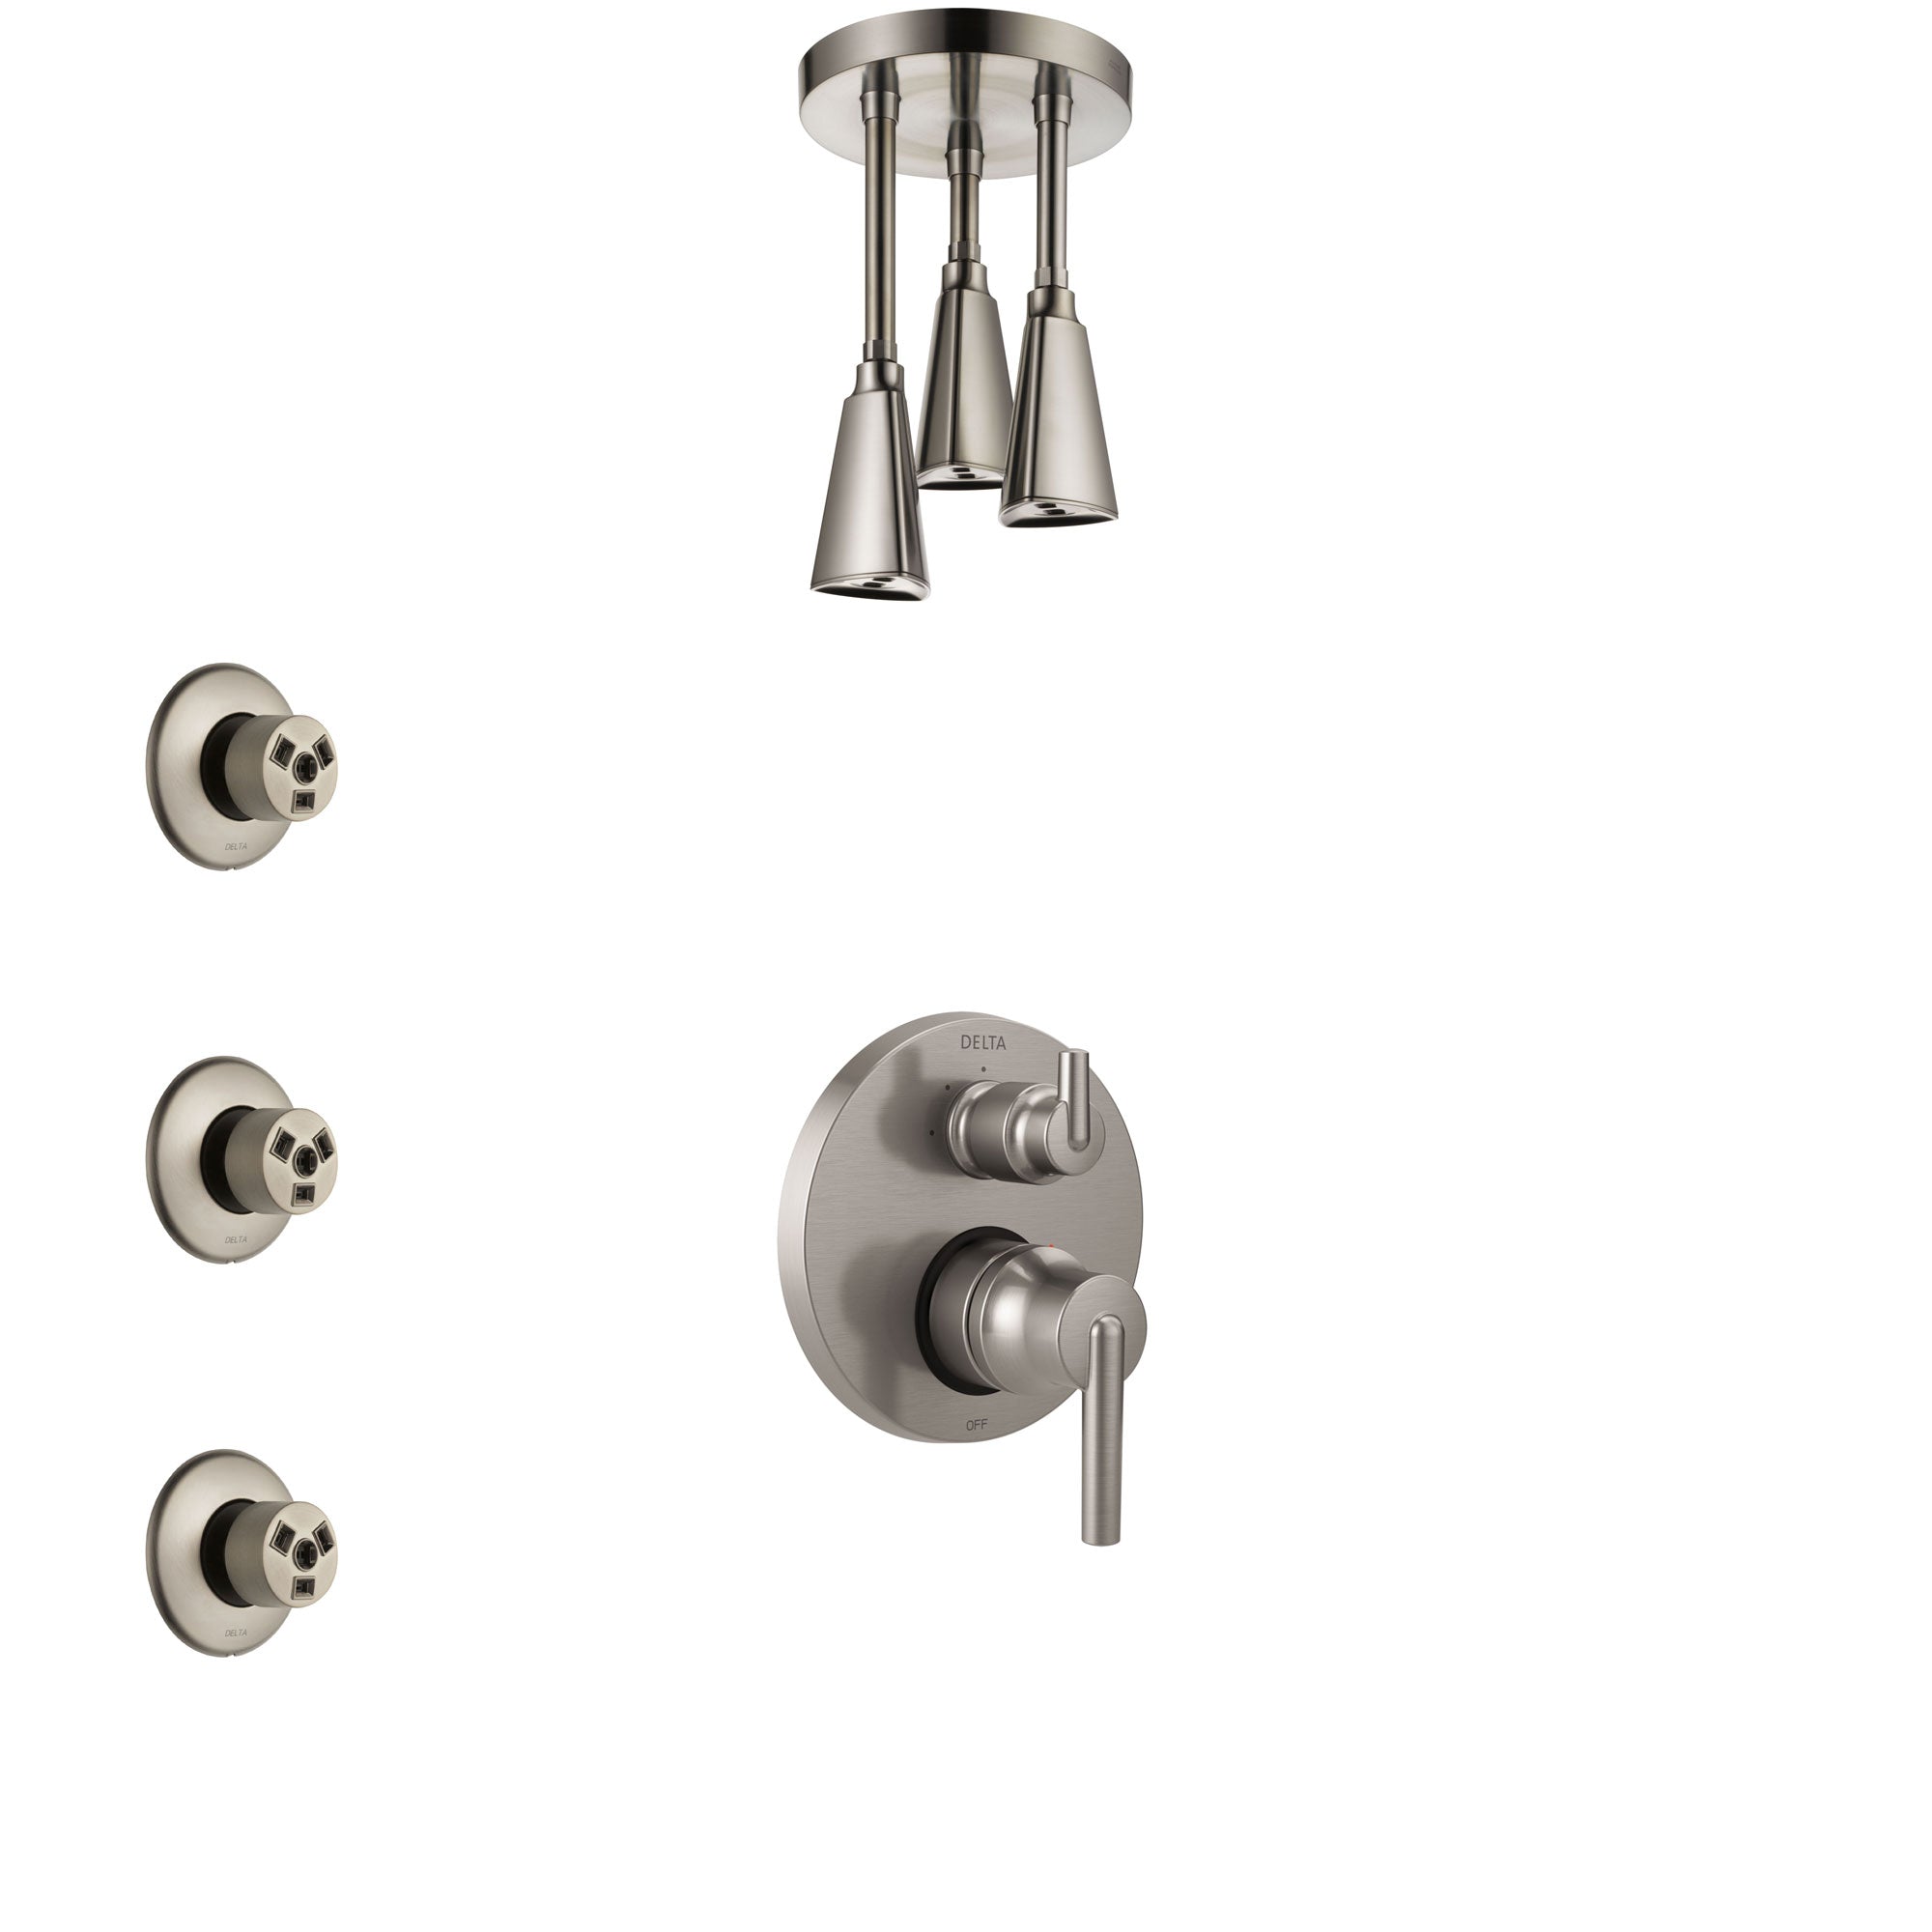 Delta Trinsic Stainless Steel Finish Shower System with Control Handle, Integrated Diverter, Ceiling Mount Showerhead, and 3 Body Sprays SS24859SS2